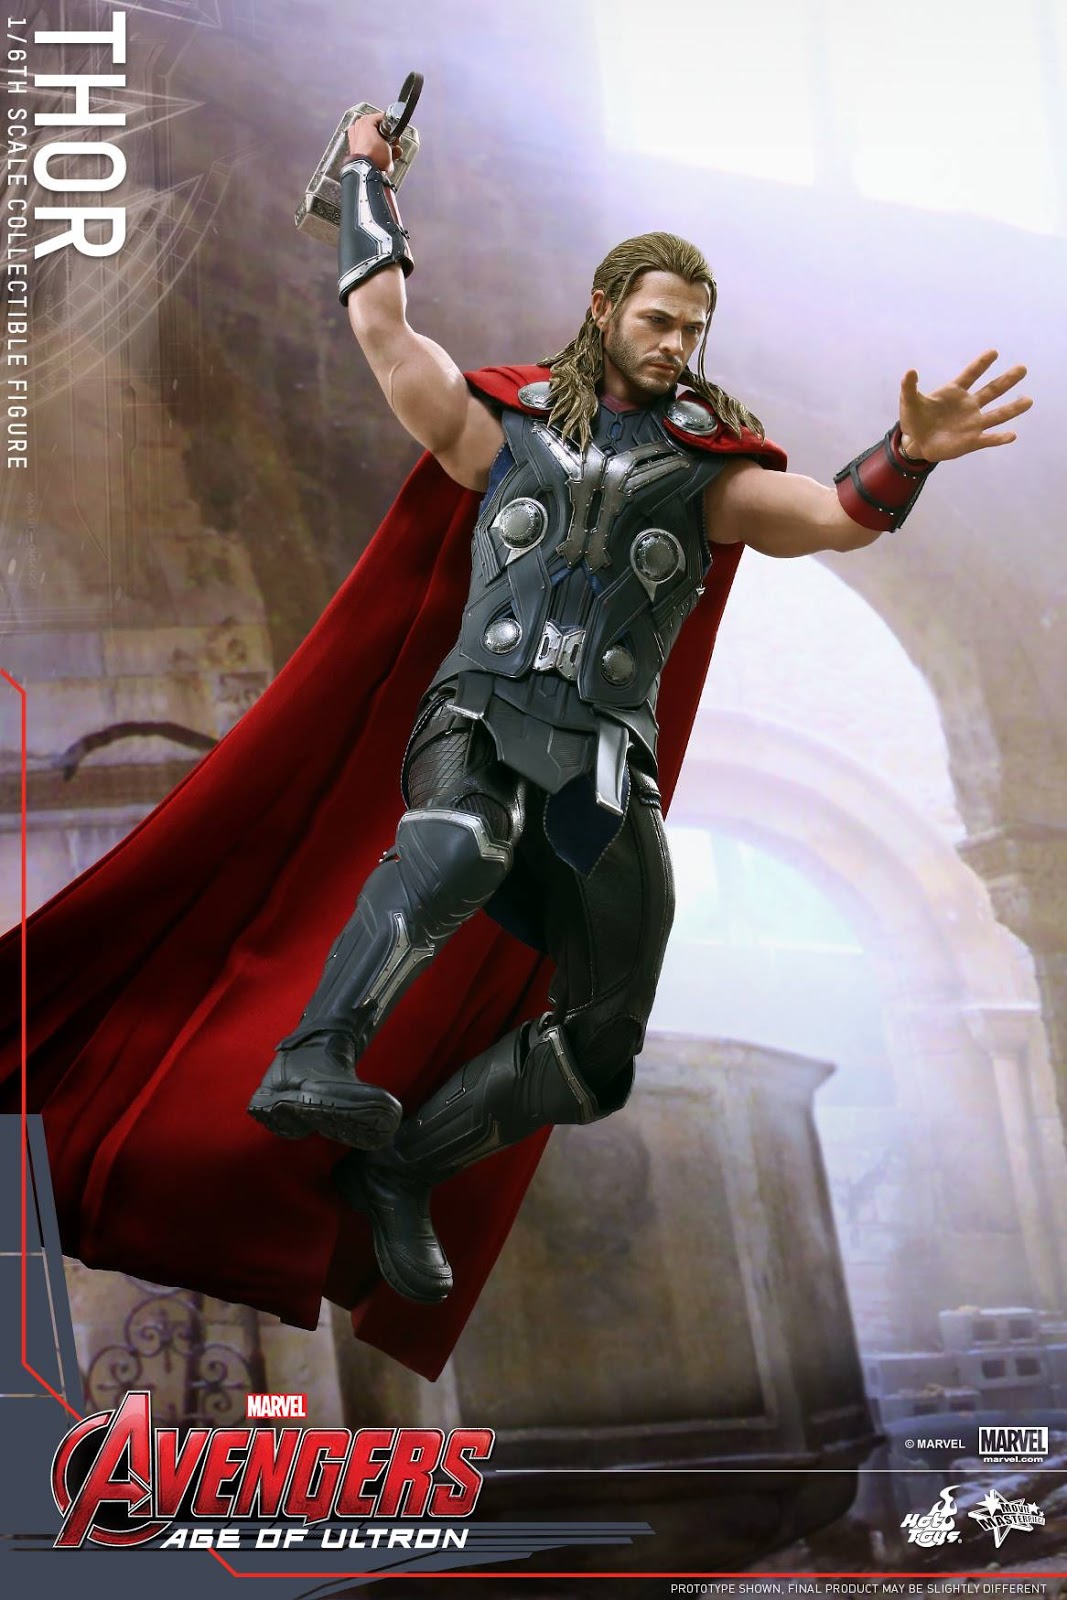 Norse God Thor – Heroes Journey Collectibles